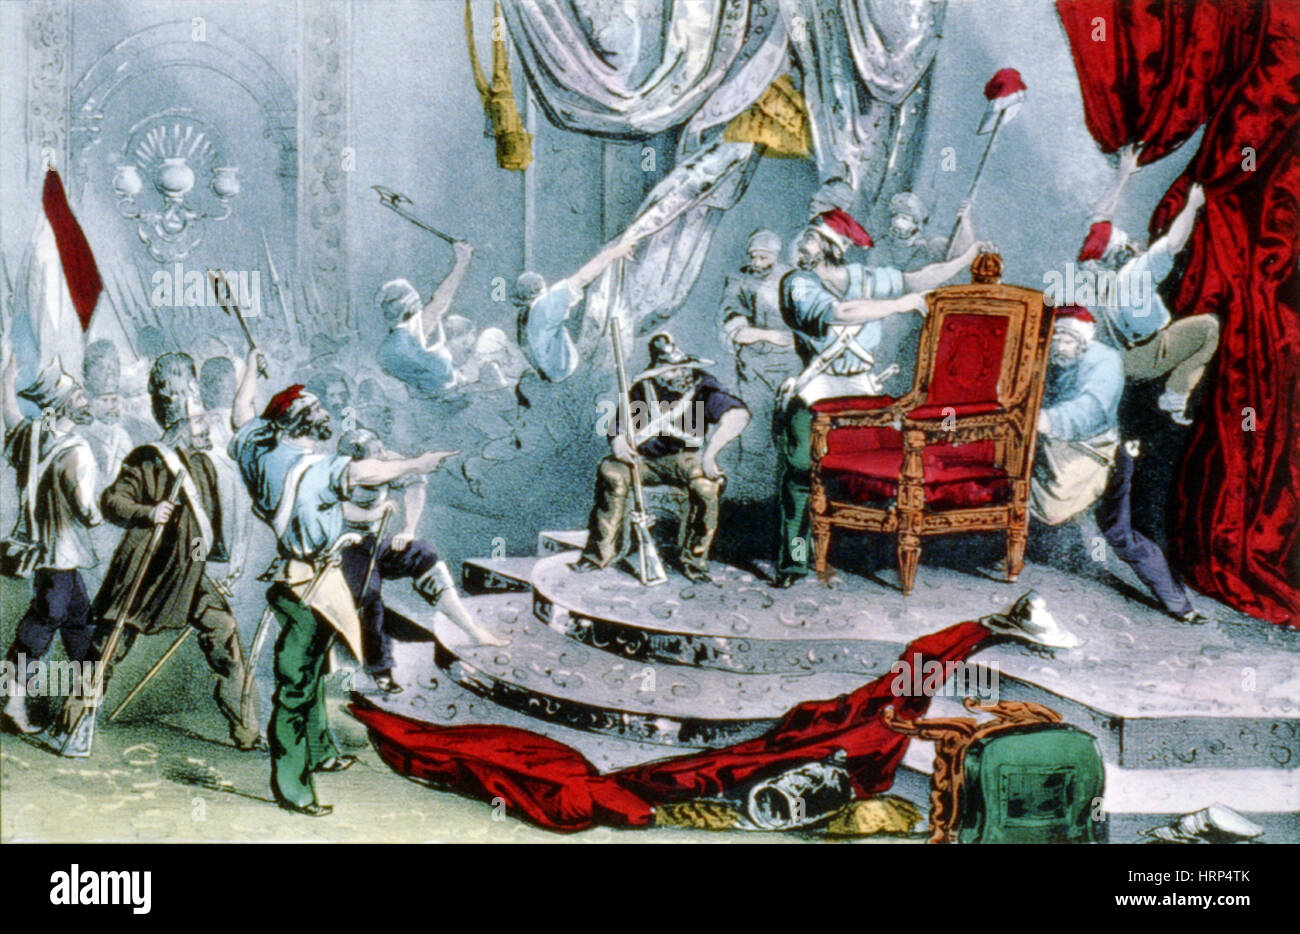 Louis-Philippe and the 1848 Revolutions